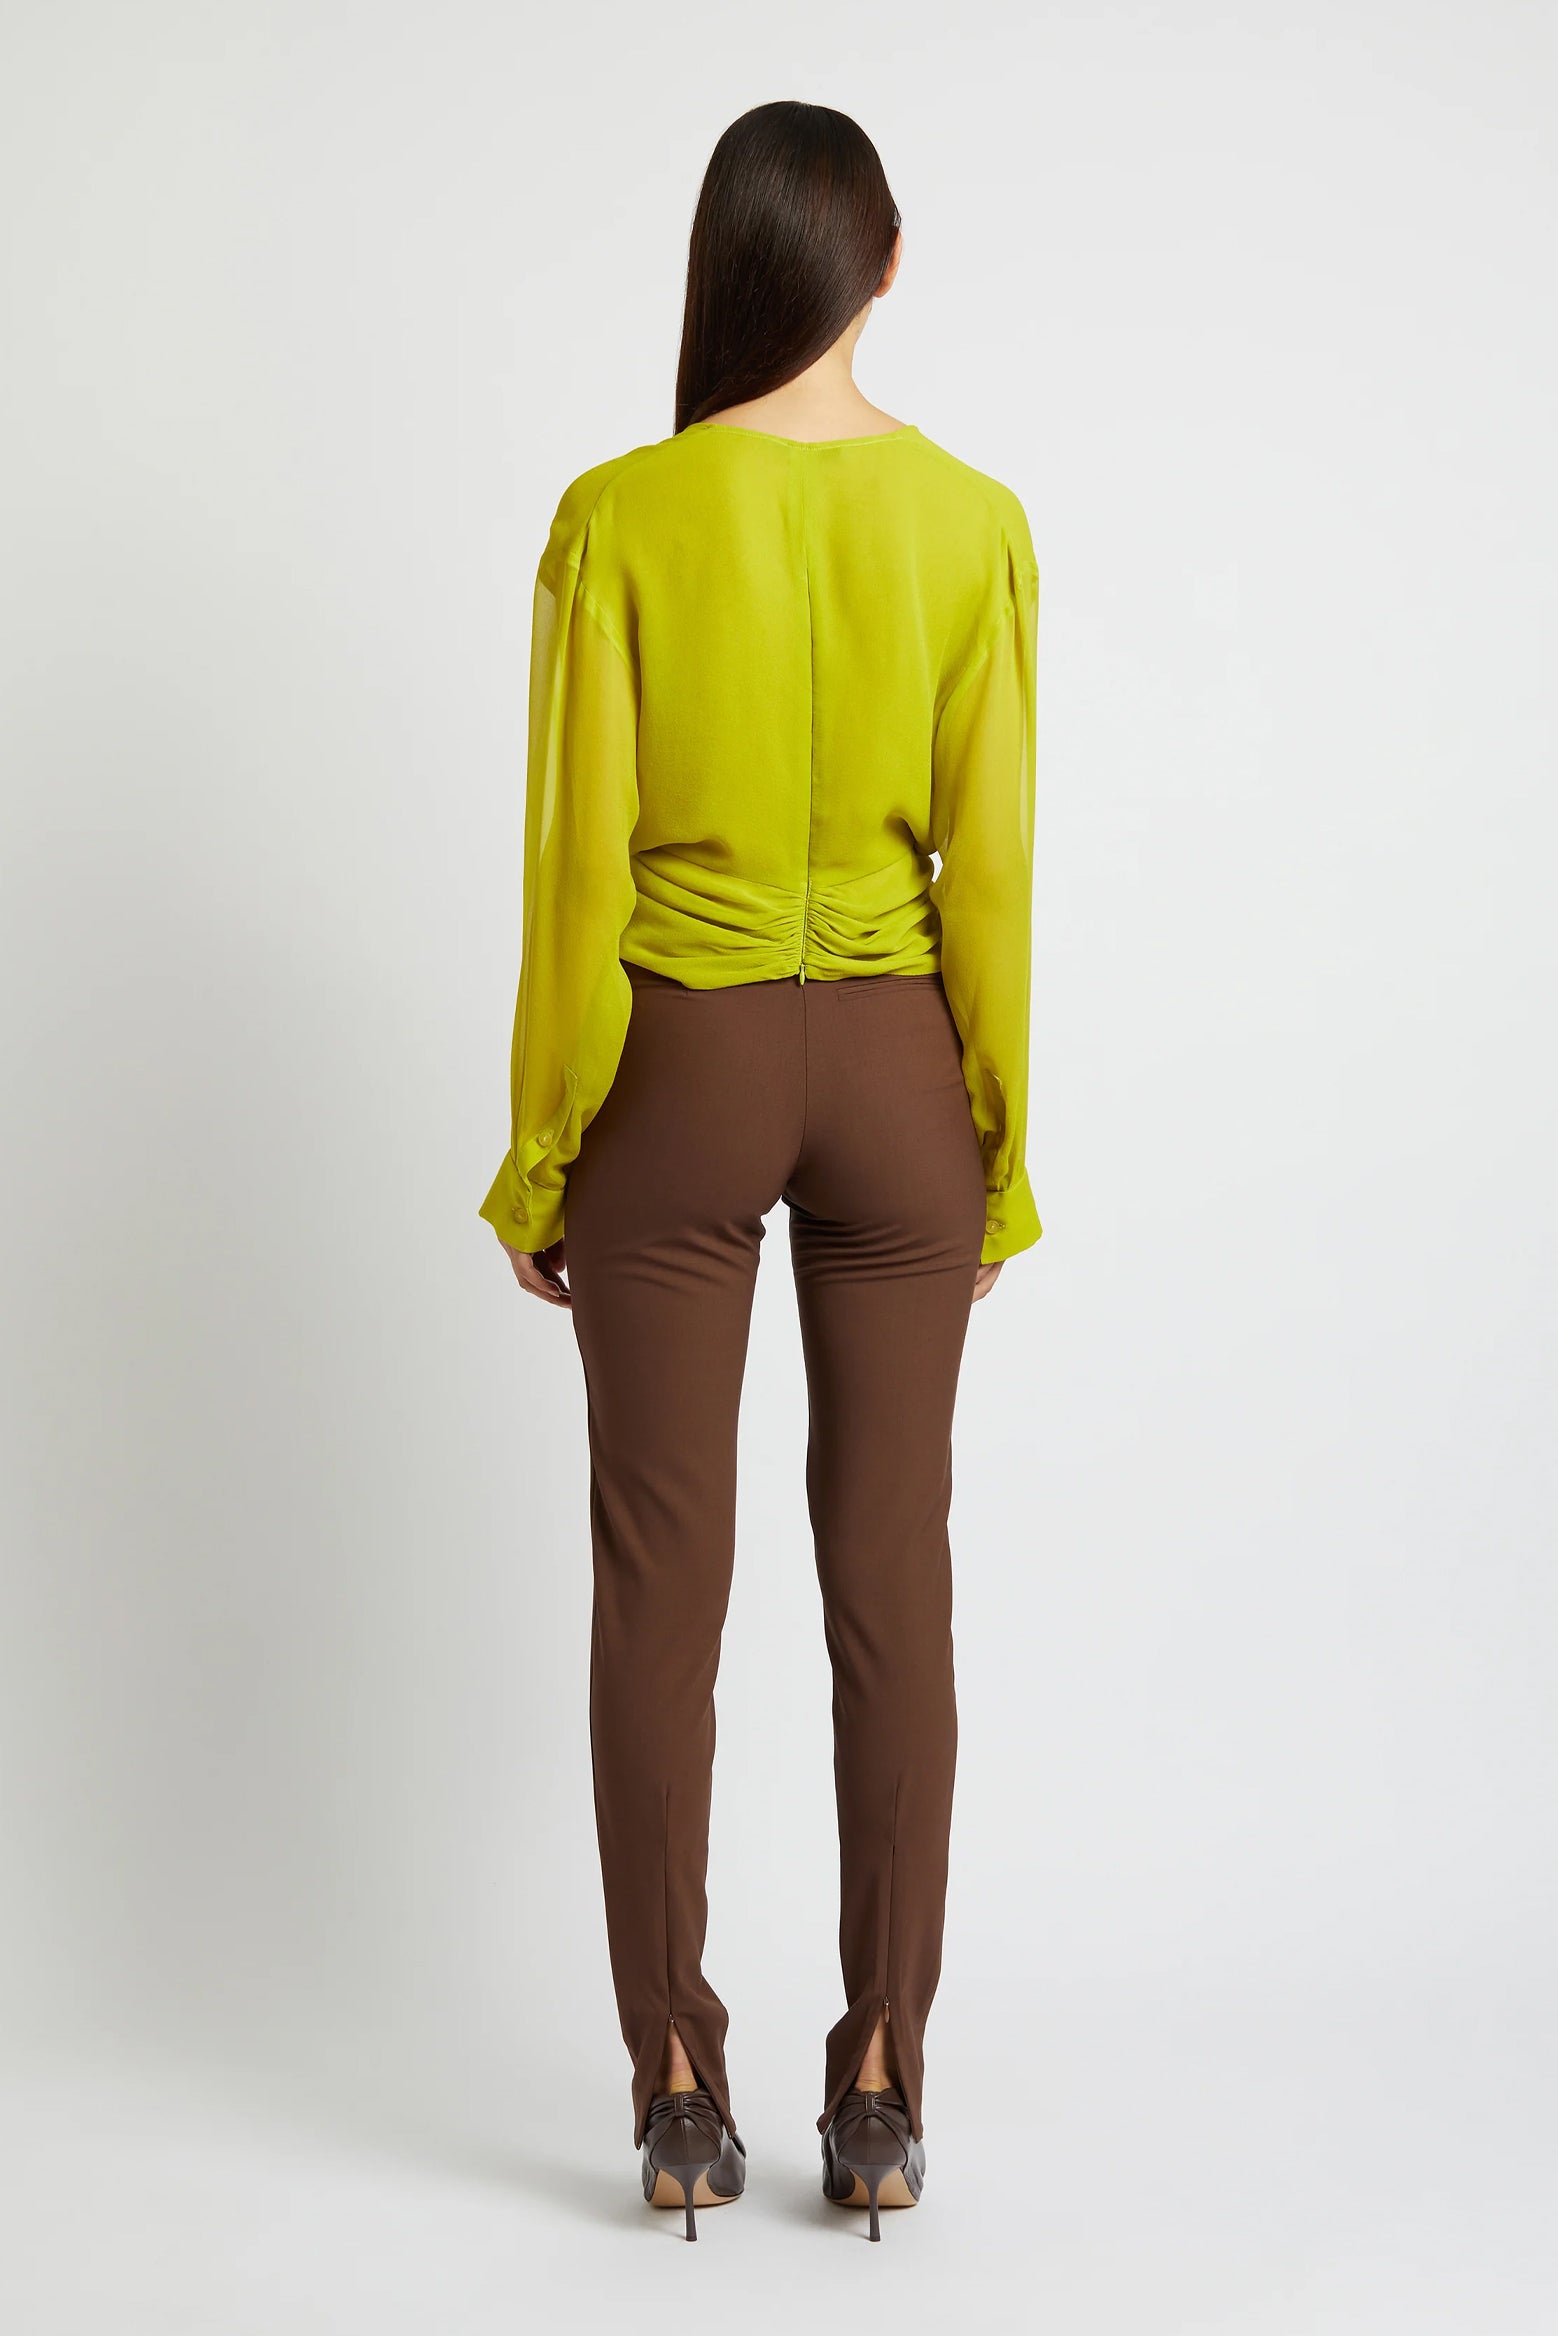 Christopher Esber Silk Springs Twist Front Top in Limade available at The New Trend Australia.